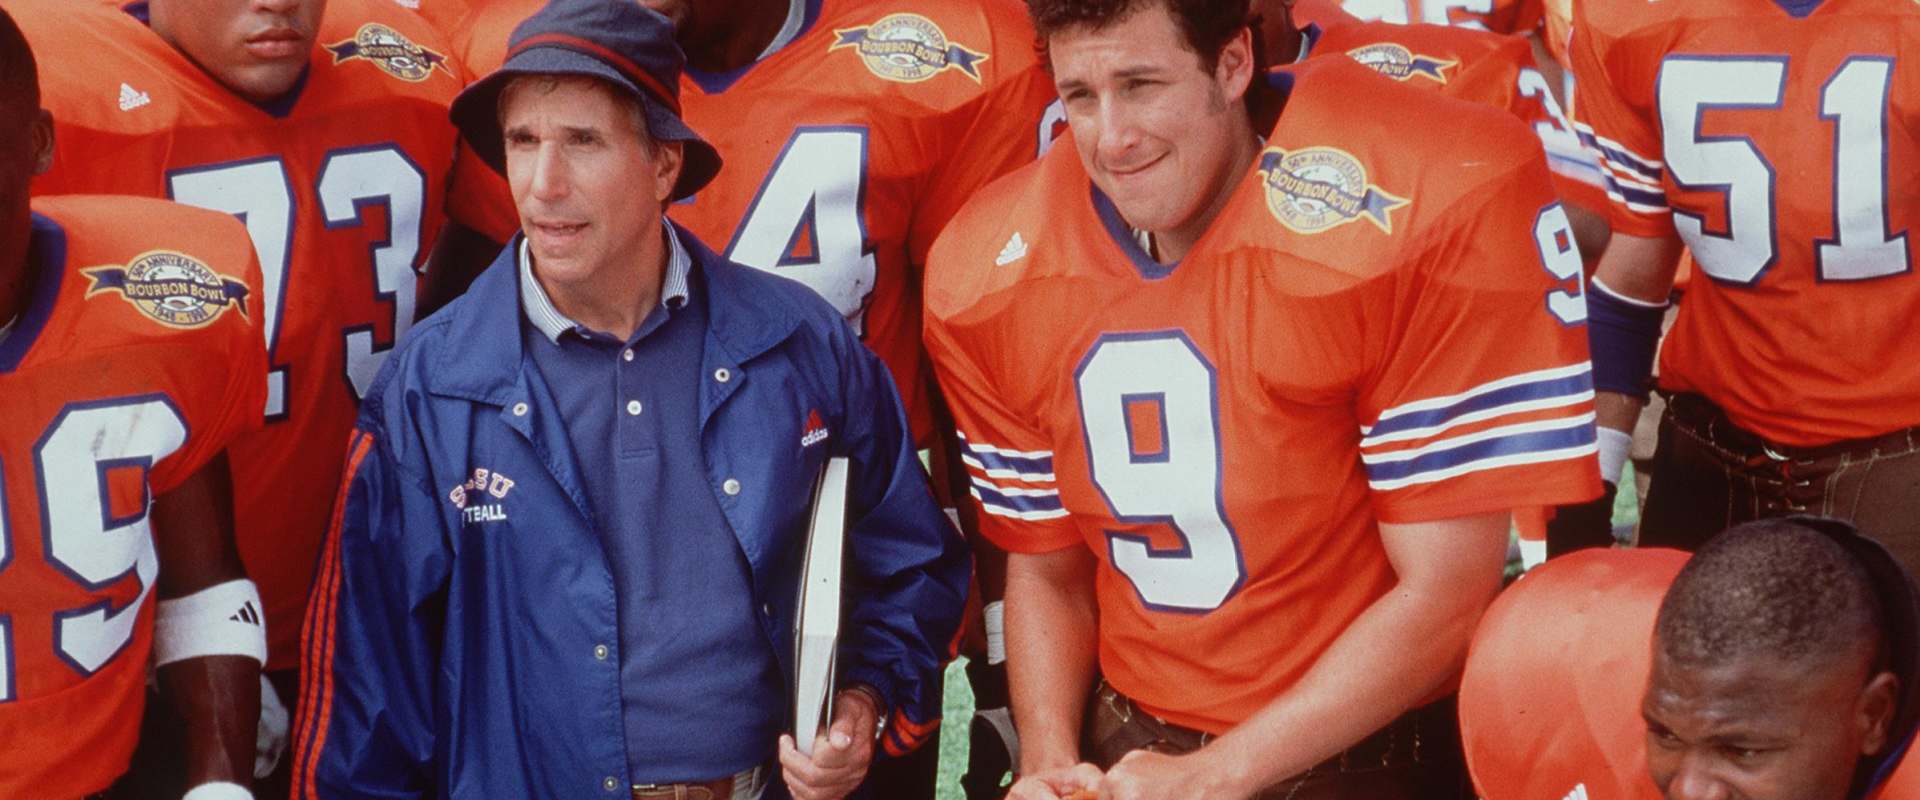 The Waterboy background 2